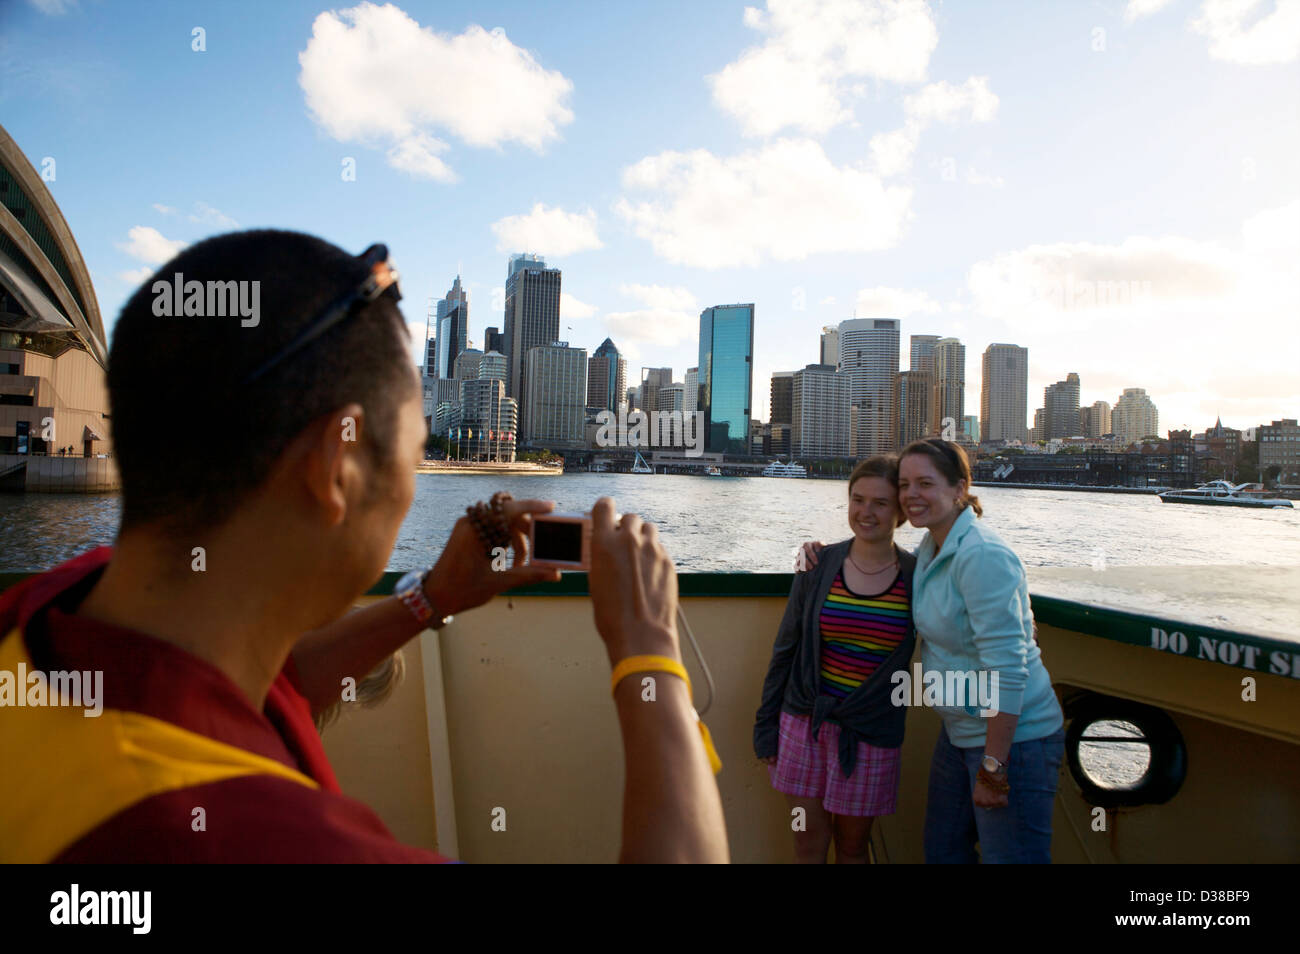 A Buddist monk takes a picture of two girls with the Sydney skyline behind them using a small digital camera. Stock Photo